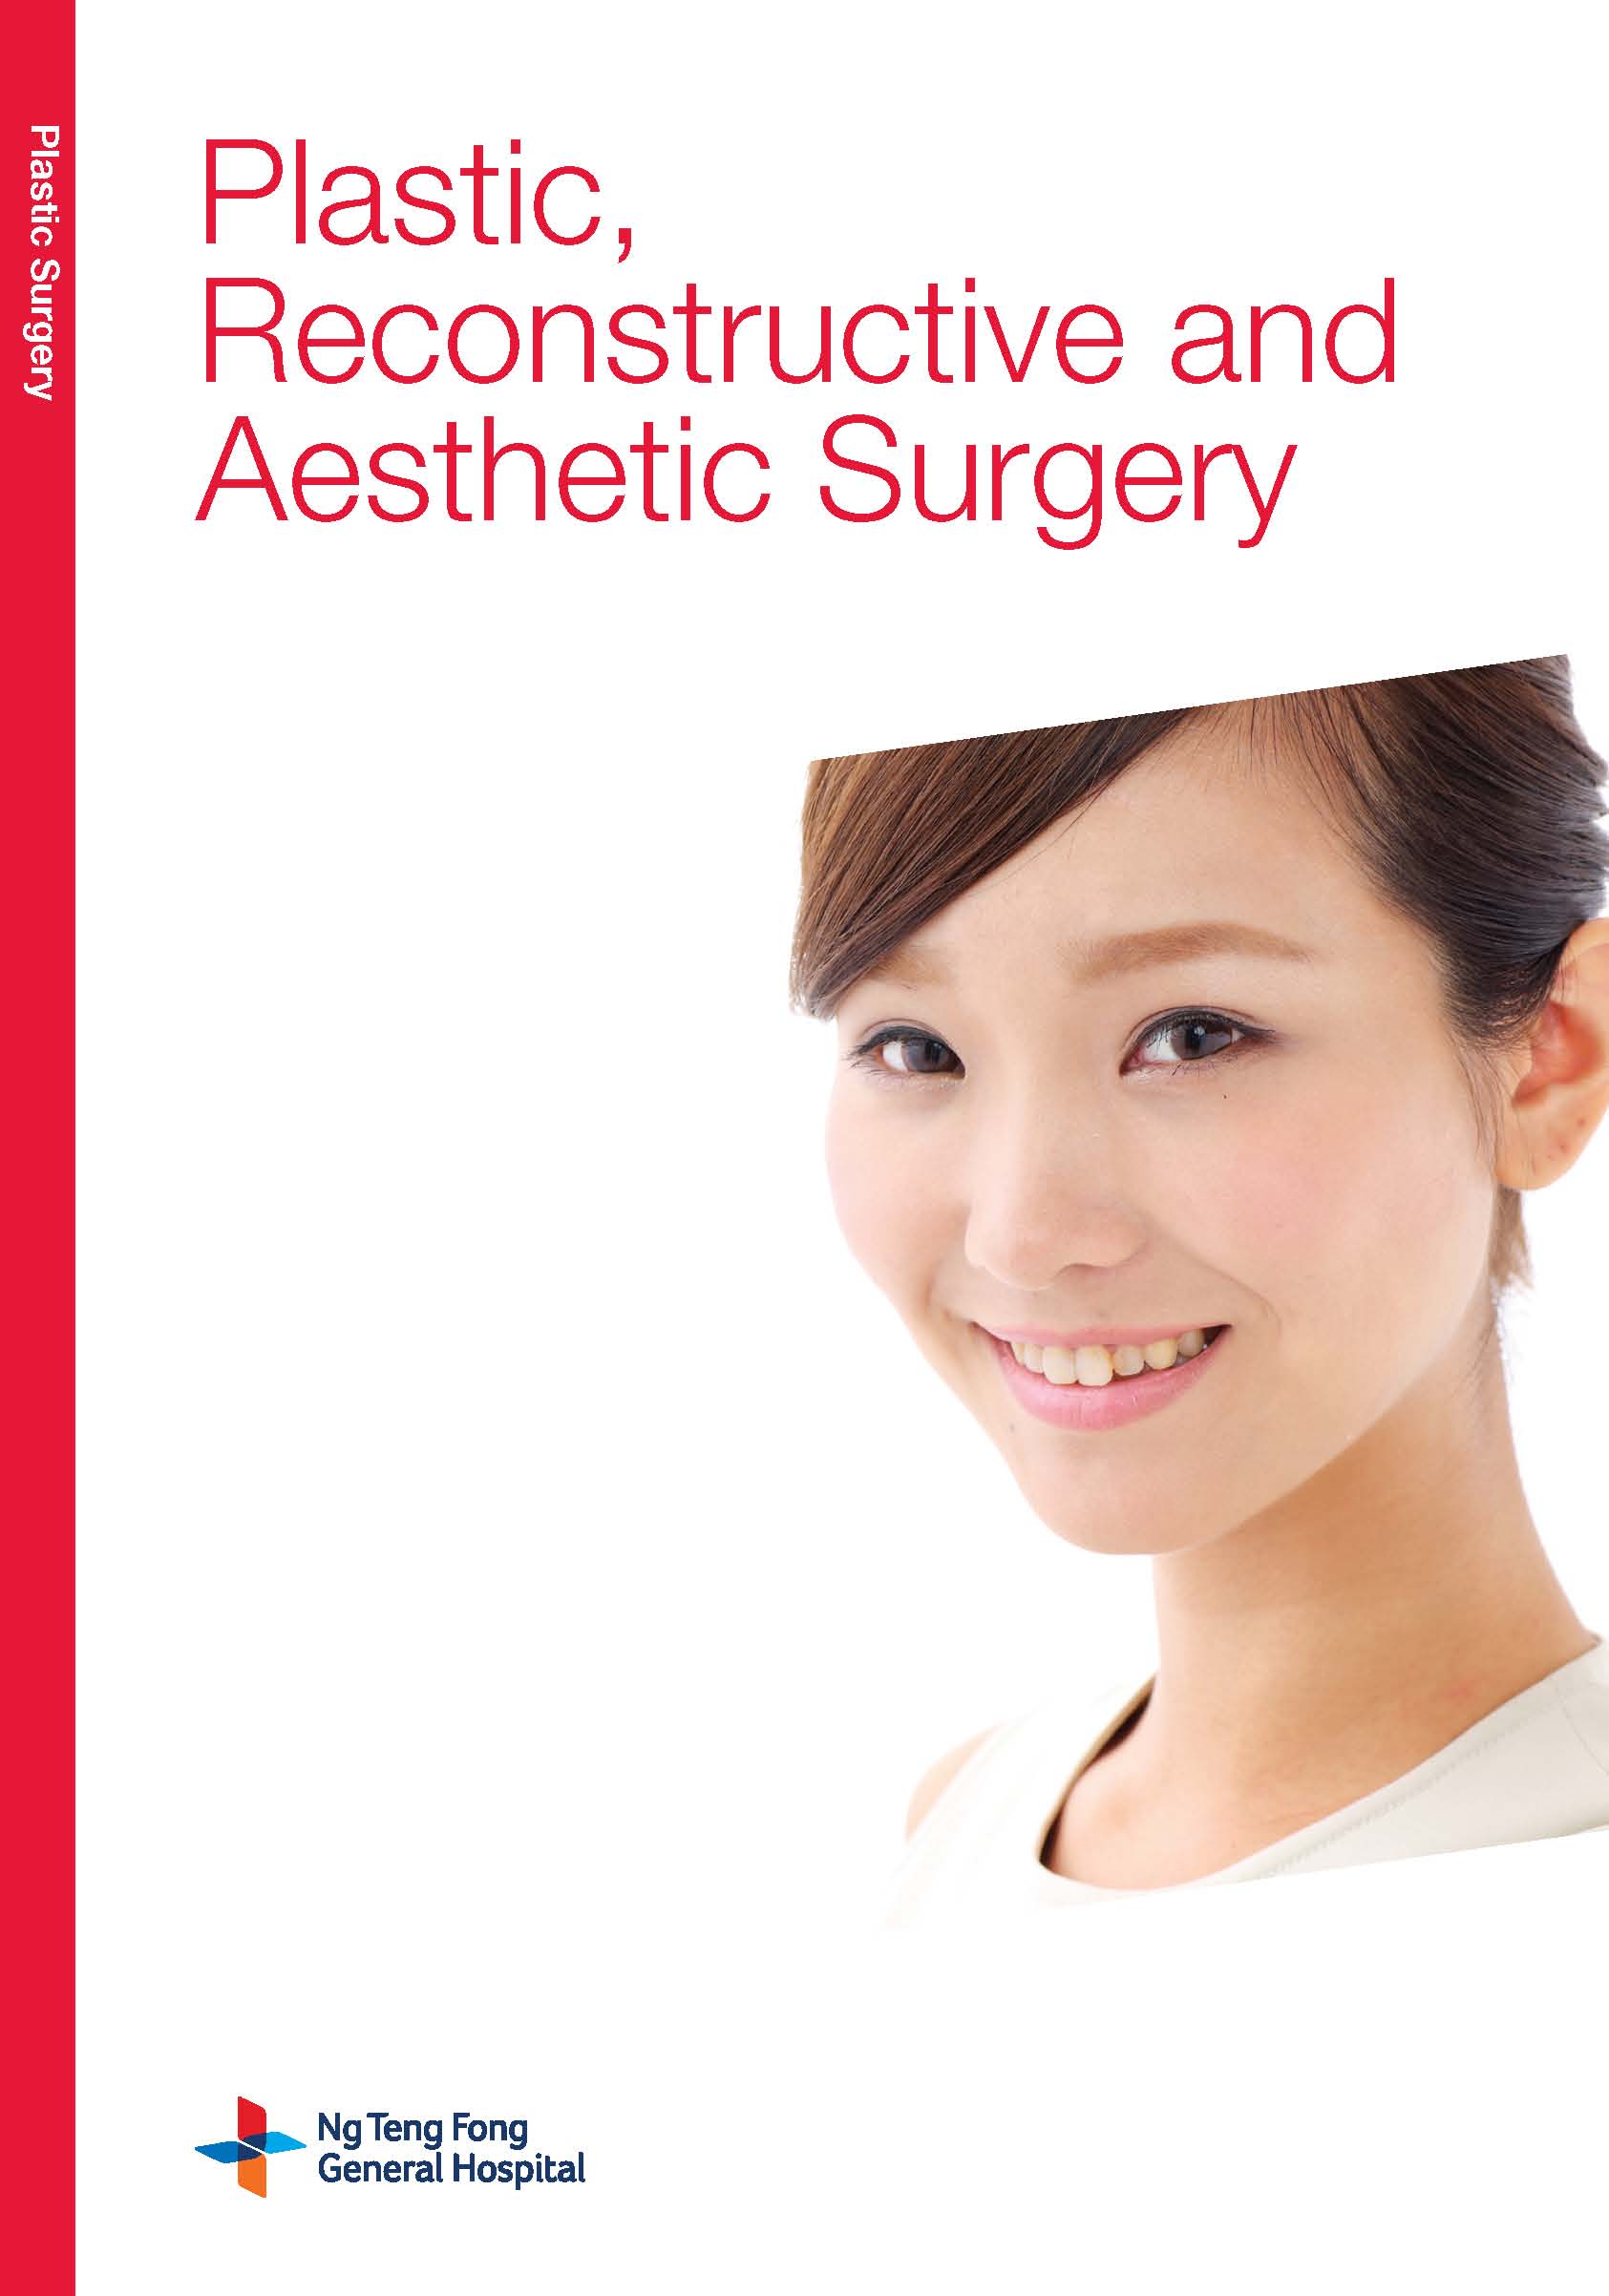 Plastic, Reconstructive and Aesthetic Surgery